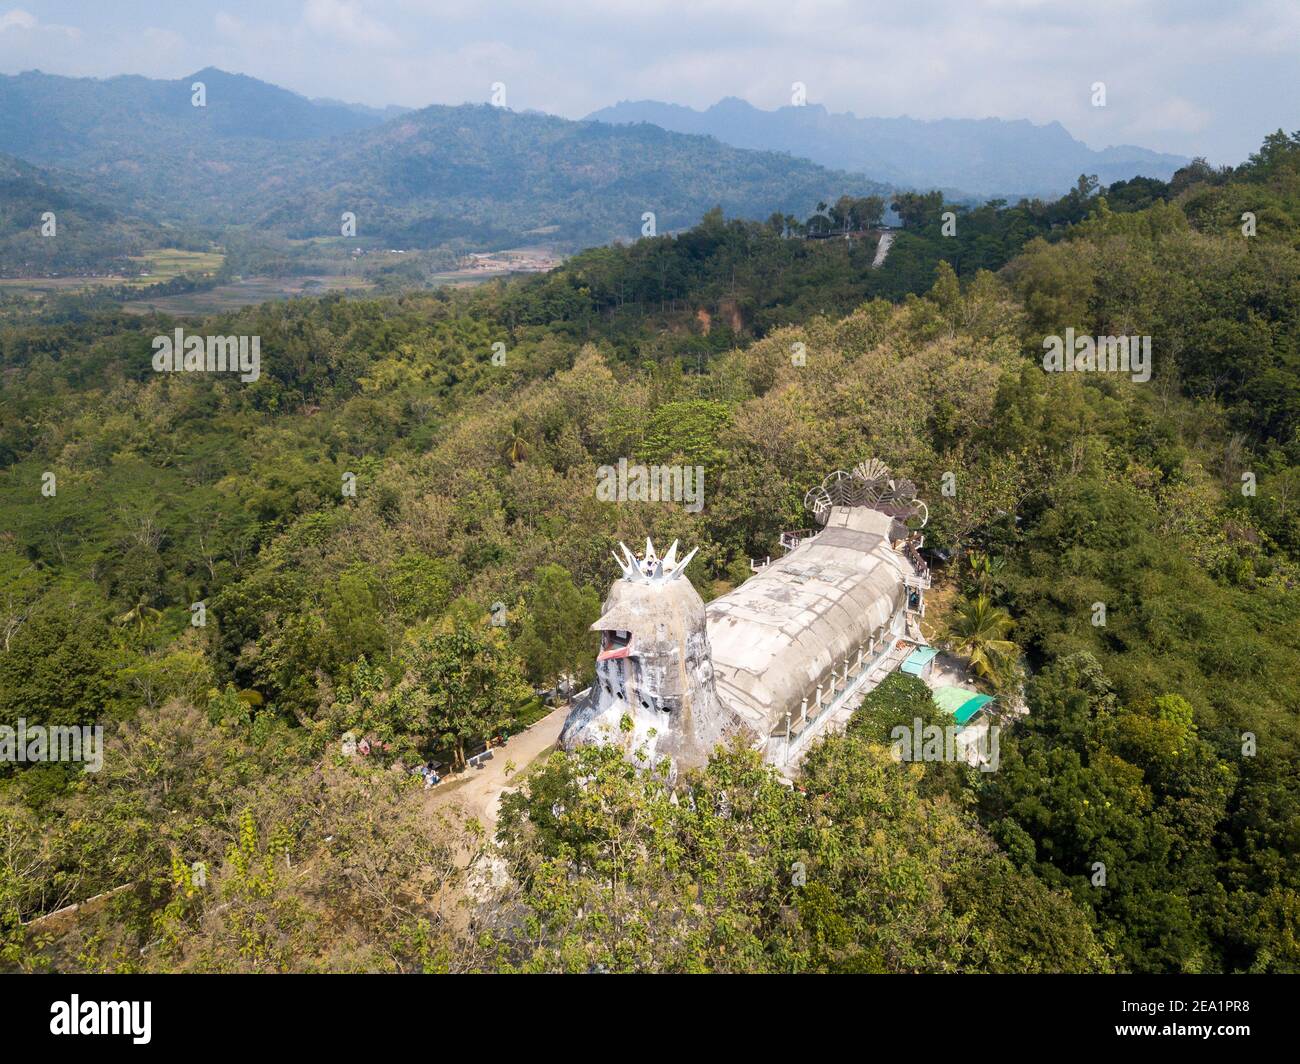 Bukit Rhema, Magelang / Indonesia - 26 March 2019 - Gereja Ayam is a 'prayer house' often referred to as a church in the area of Magelang on the islan Stock Photo